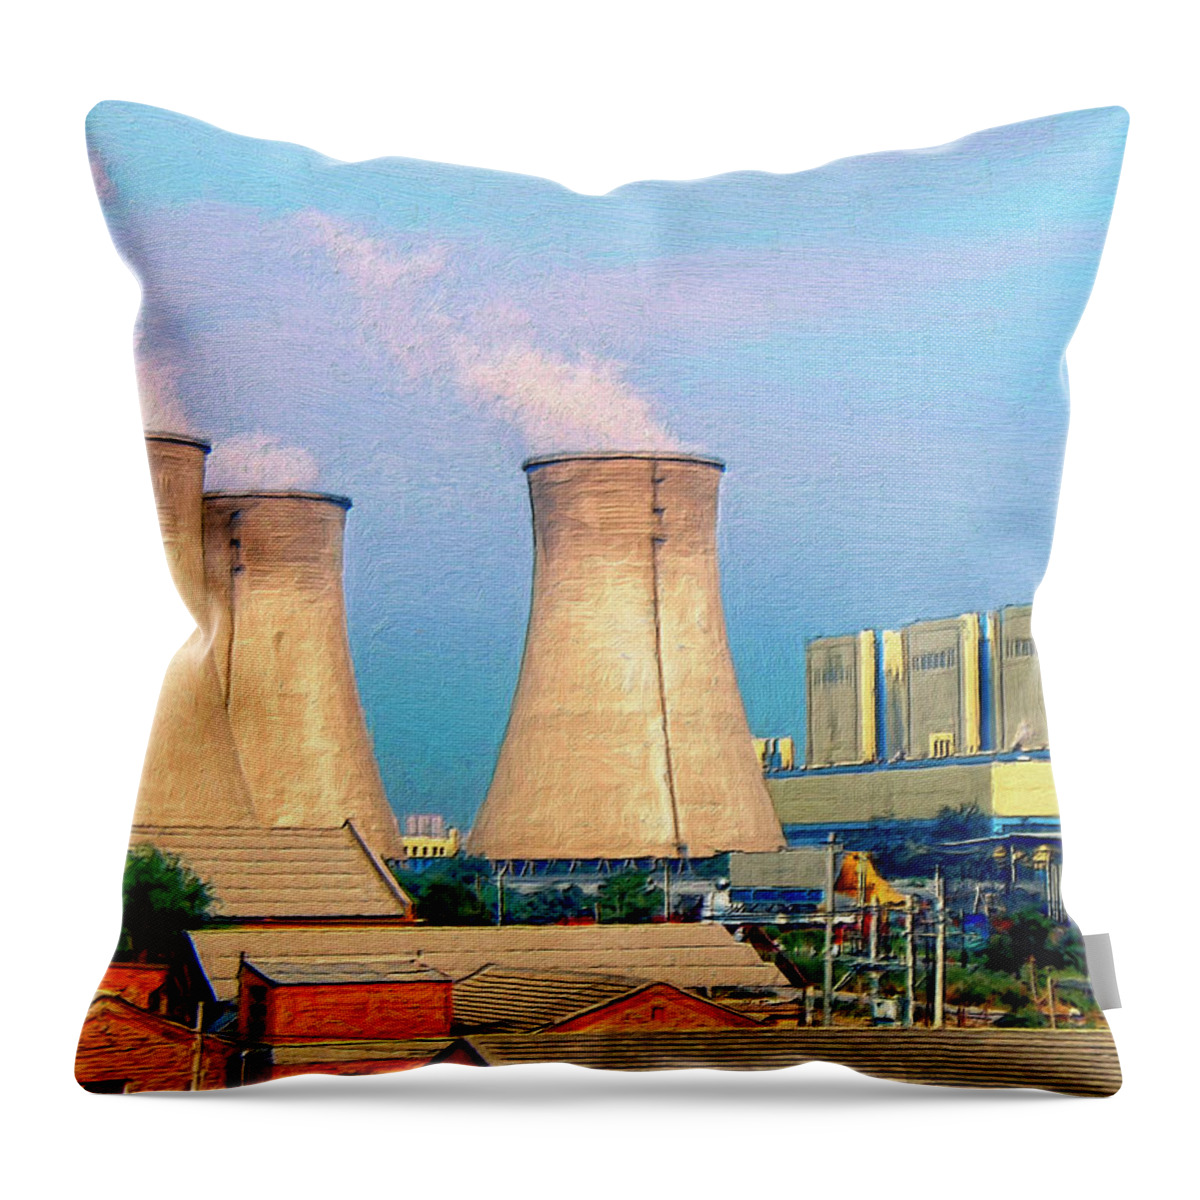 Nuclear Power Throw Pillow featuring the painting Upscale Neighborhood by Dominic Piperata